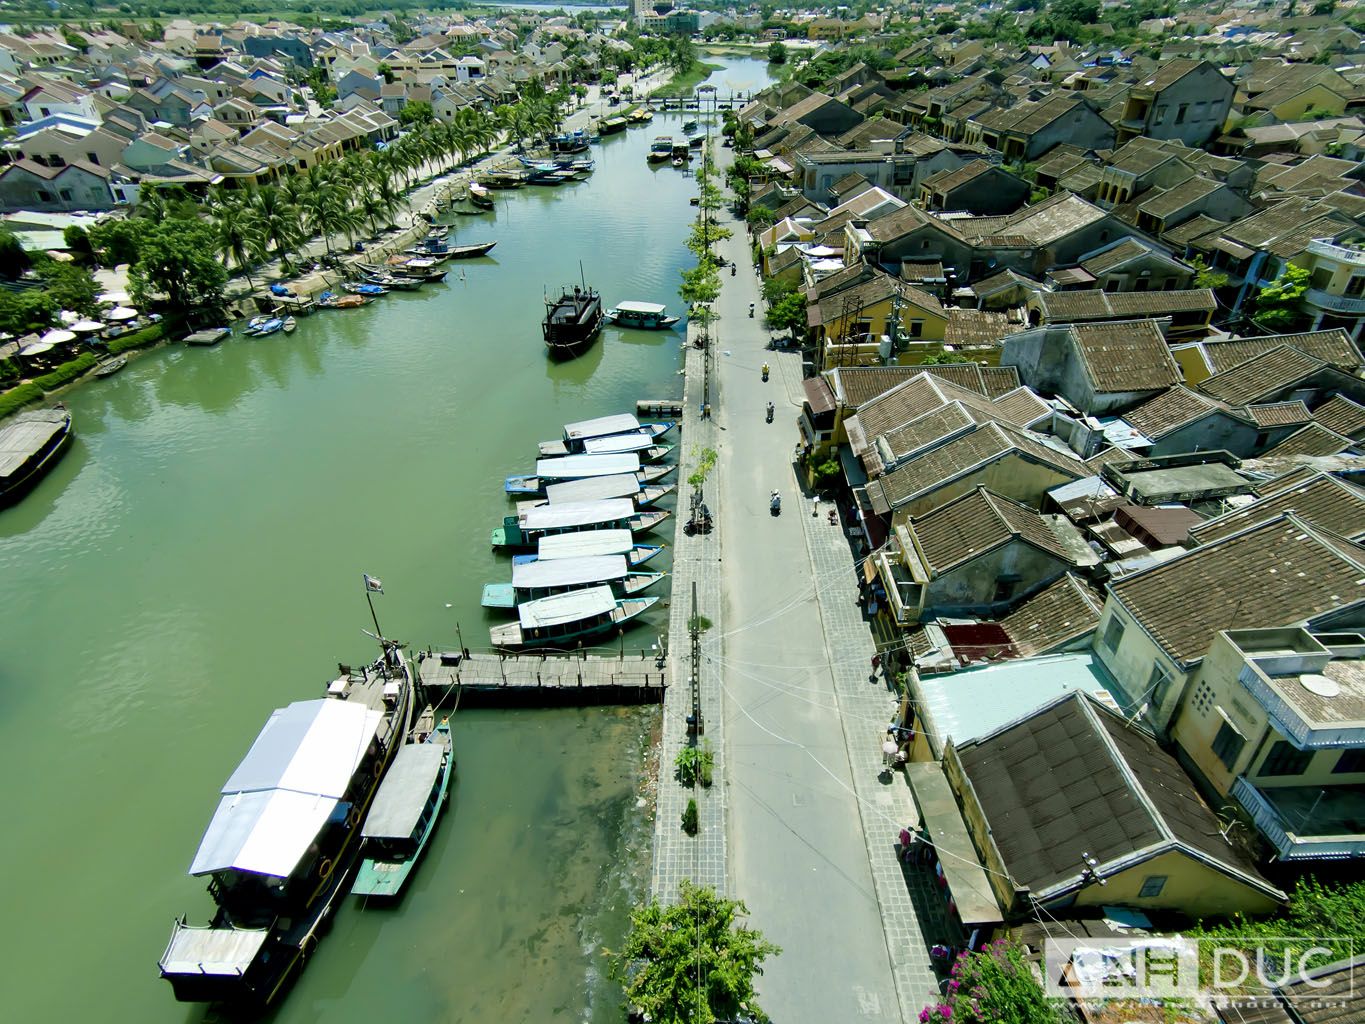 Hoian from the sky